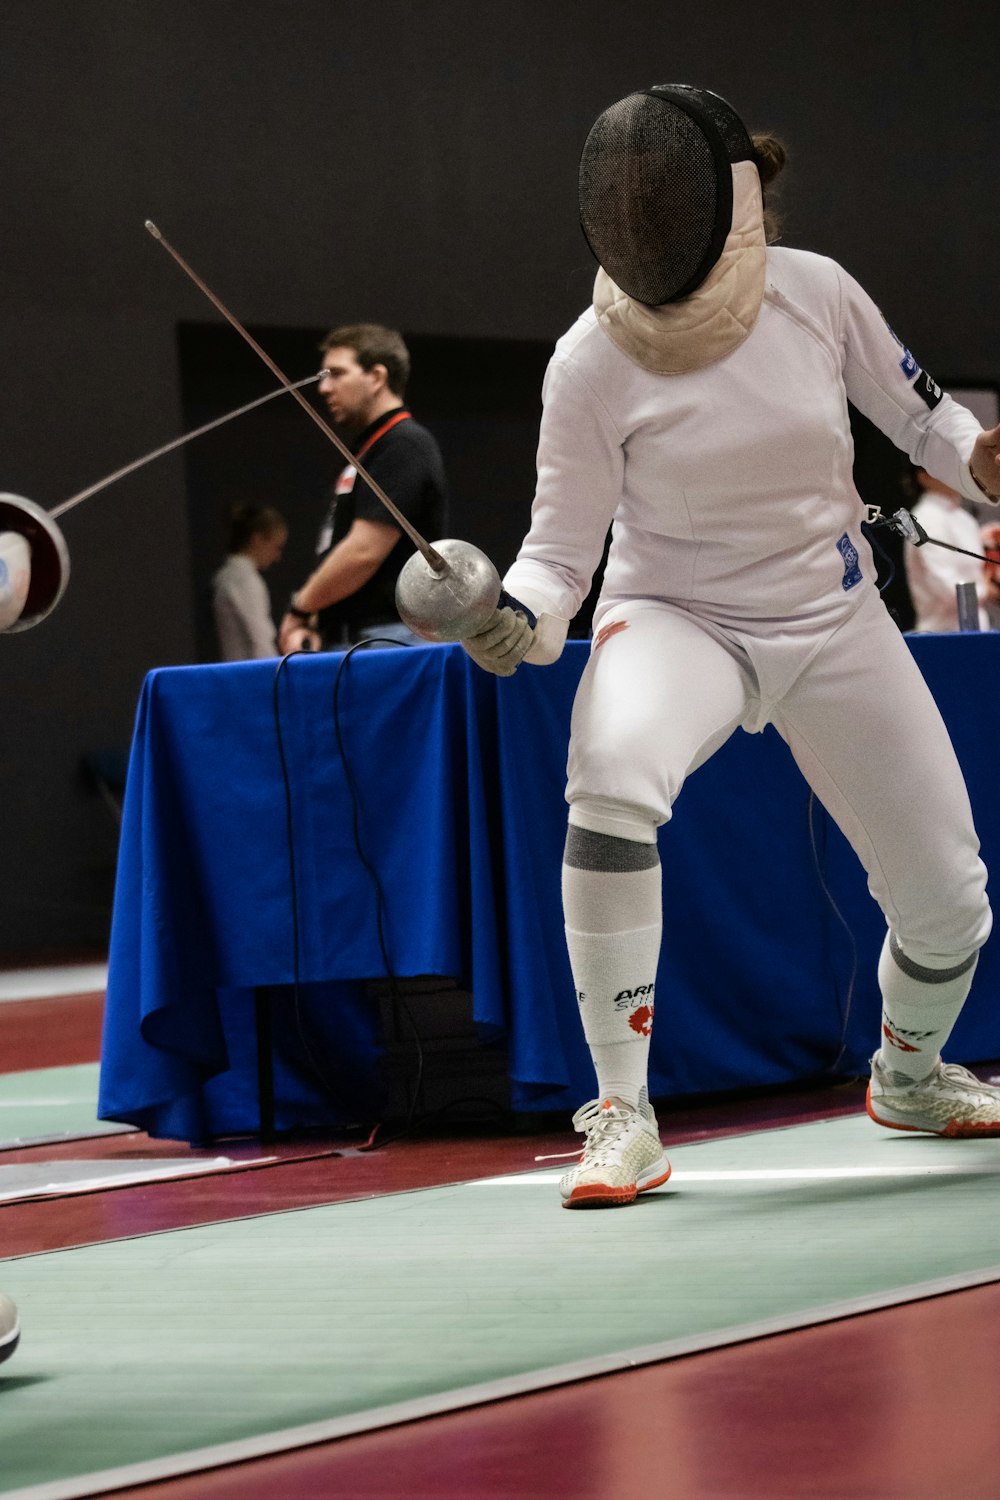 a person in a fencing stance with a sword